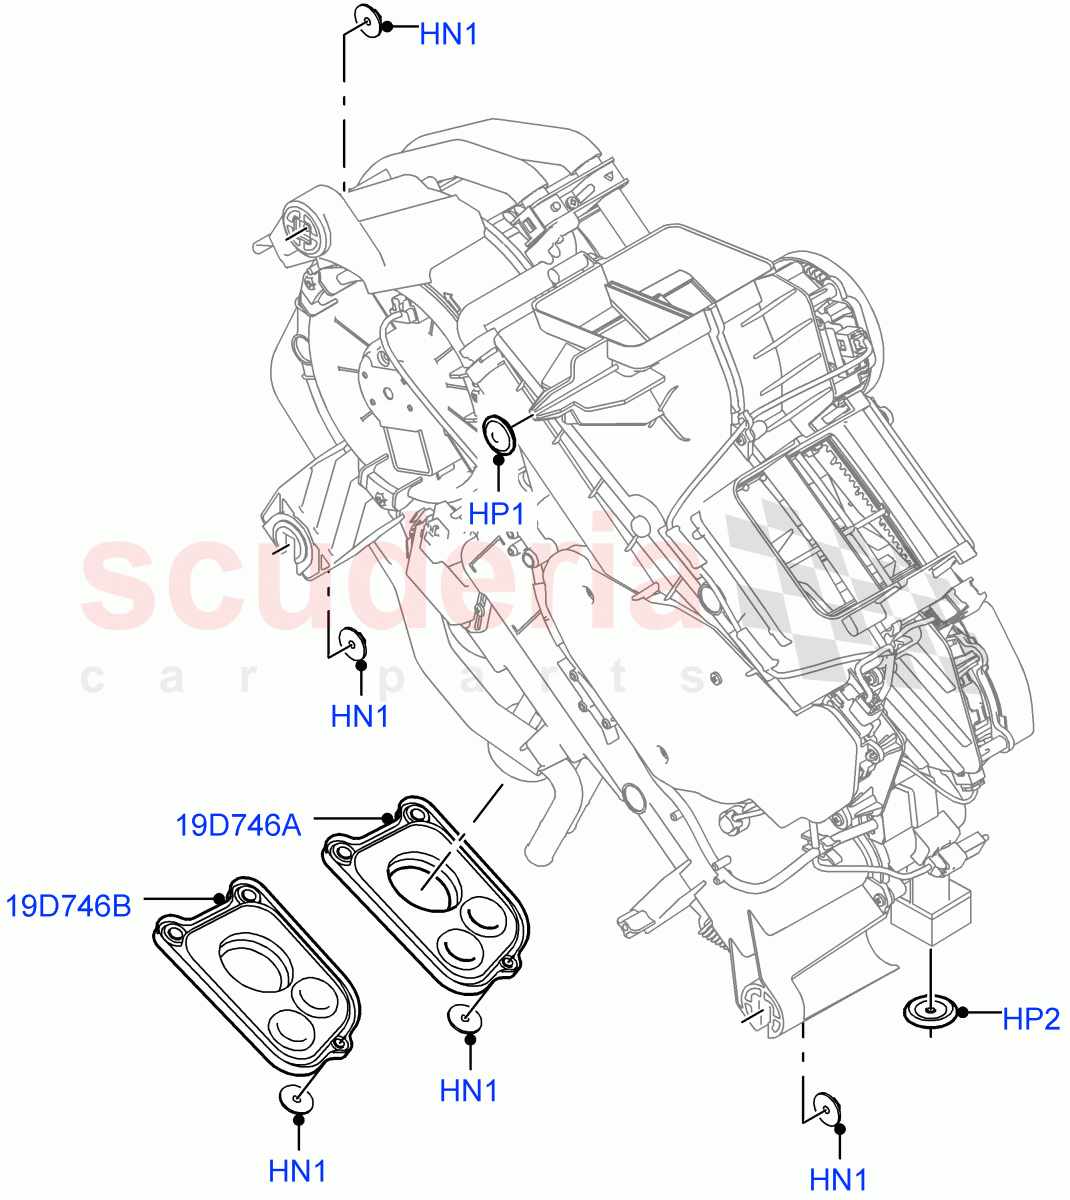 Heater/Air Cond.External Components(Solihull Plant Build, Auxiliary Unit)((V)FROMHA000001) of Land Rover Land Rover Discovery 5 (2017+) [3.0 DOHC GDI SC V6 Petrol]